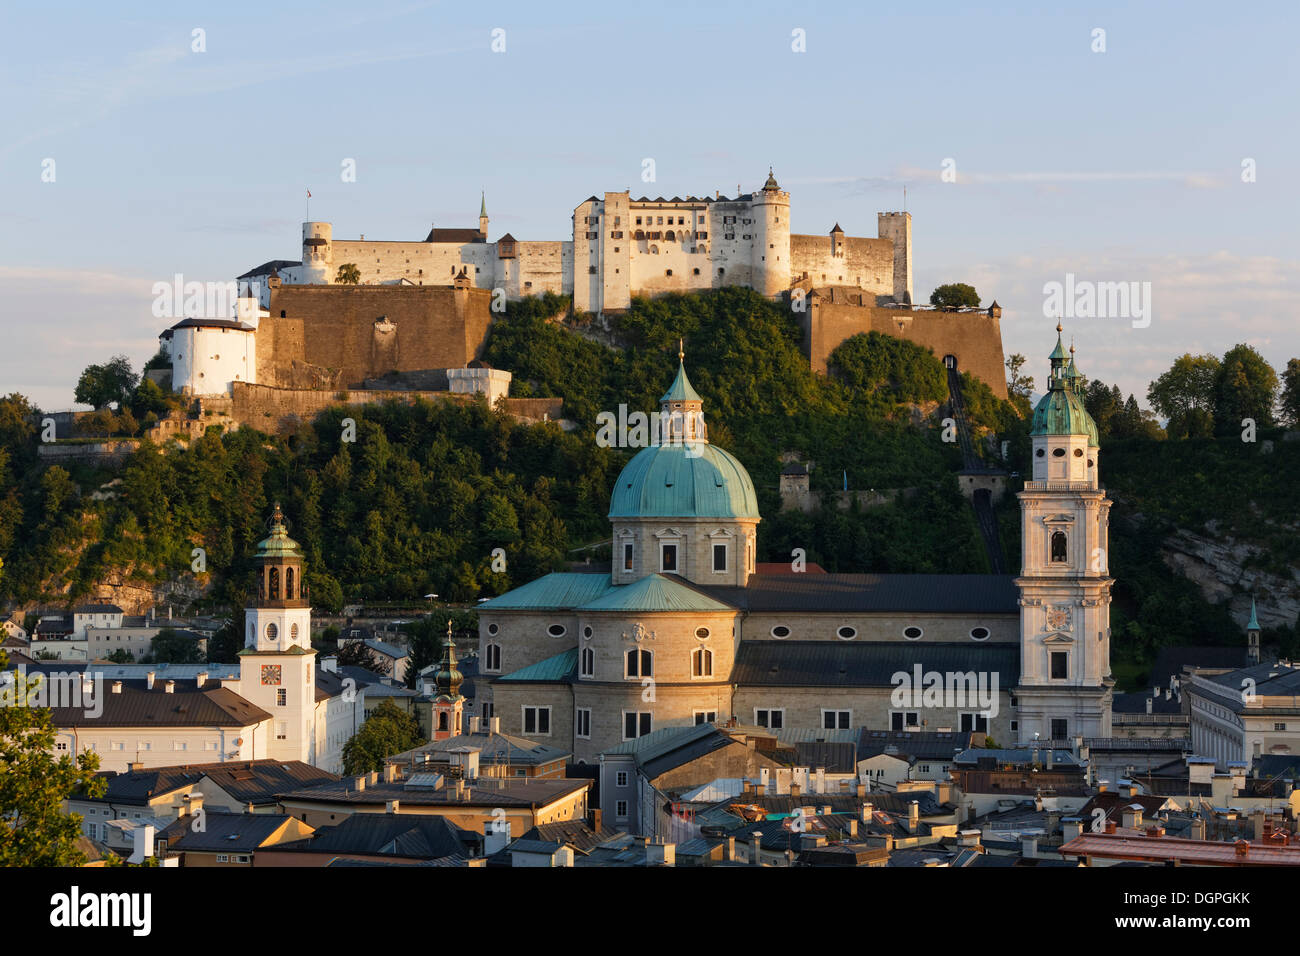 View of Hohensalzburg Castle, Neue Residenz palace, the tower with the glockenspiel and Salzburg Cathedral as seen from Stock Photo